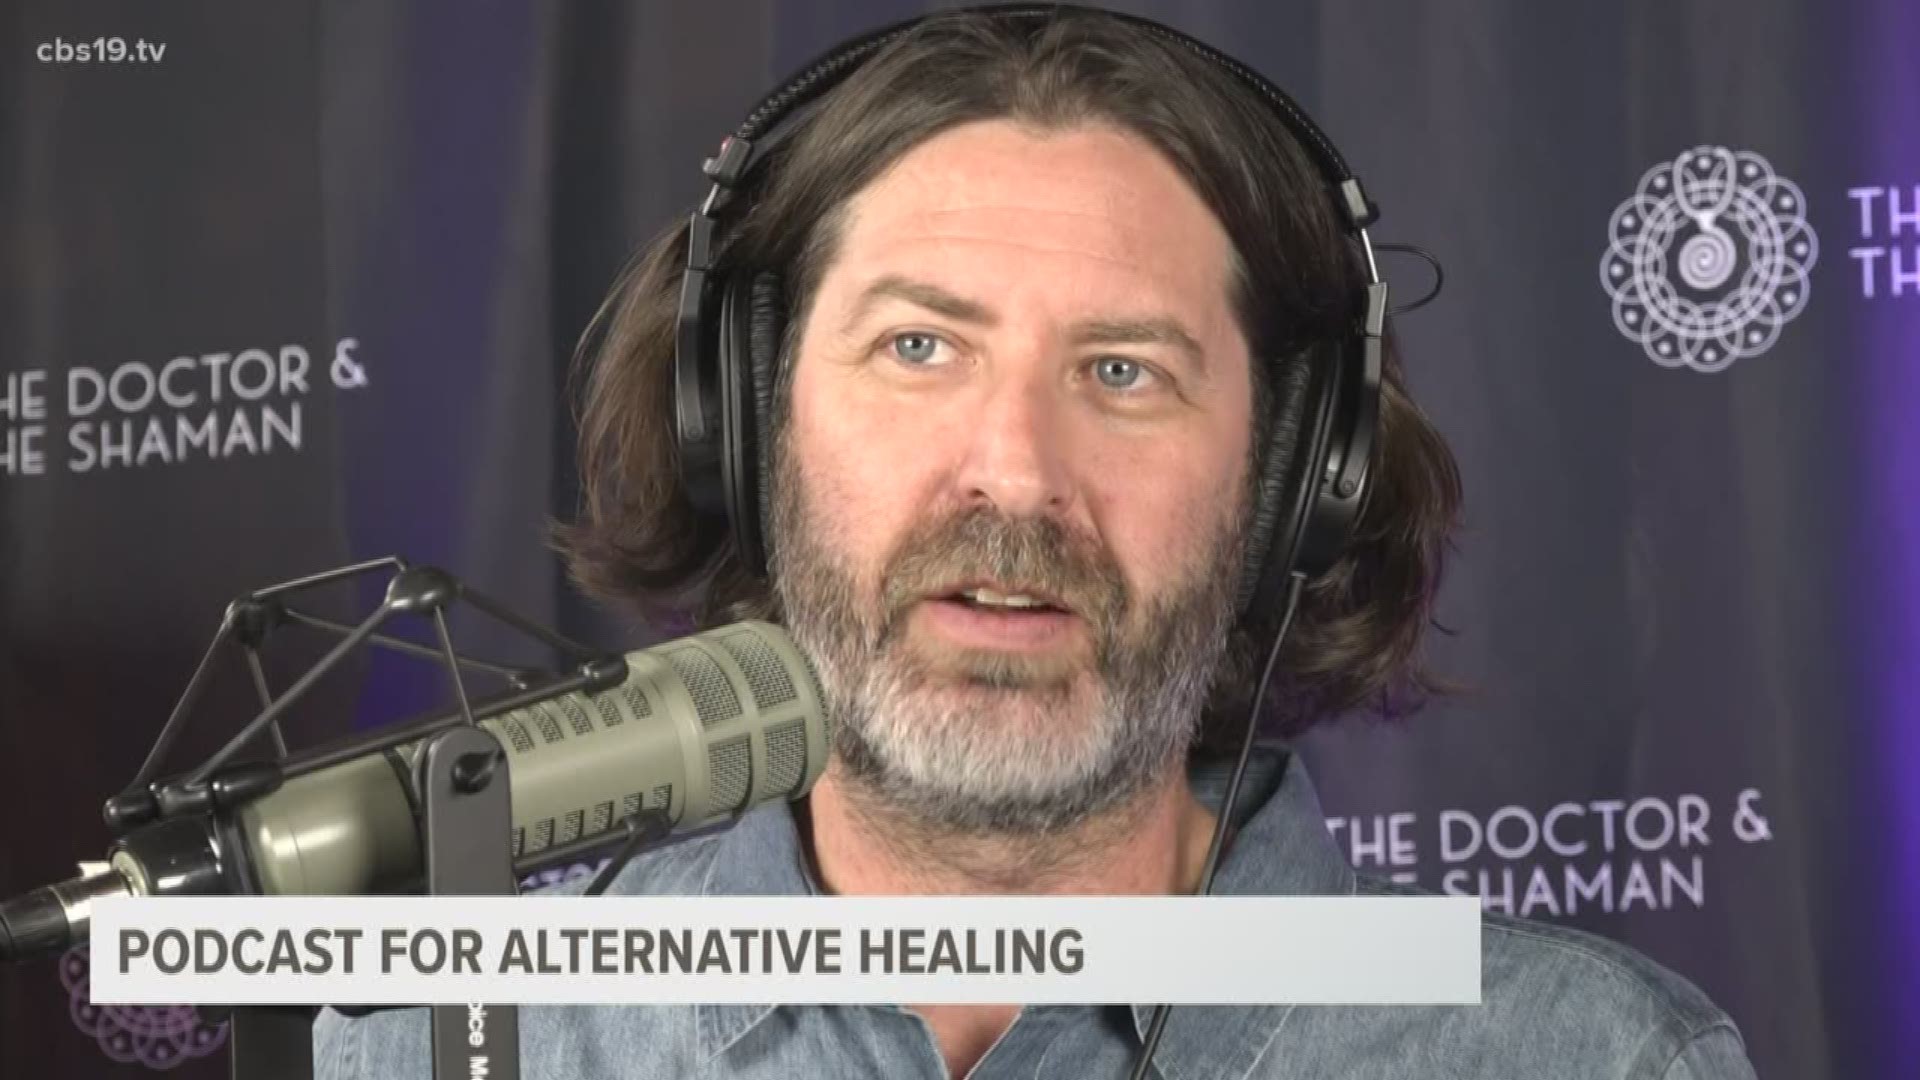 odcast for Alternative Healing